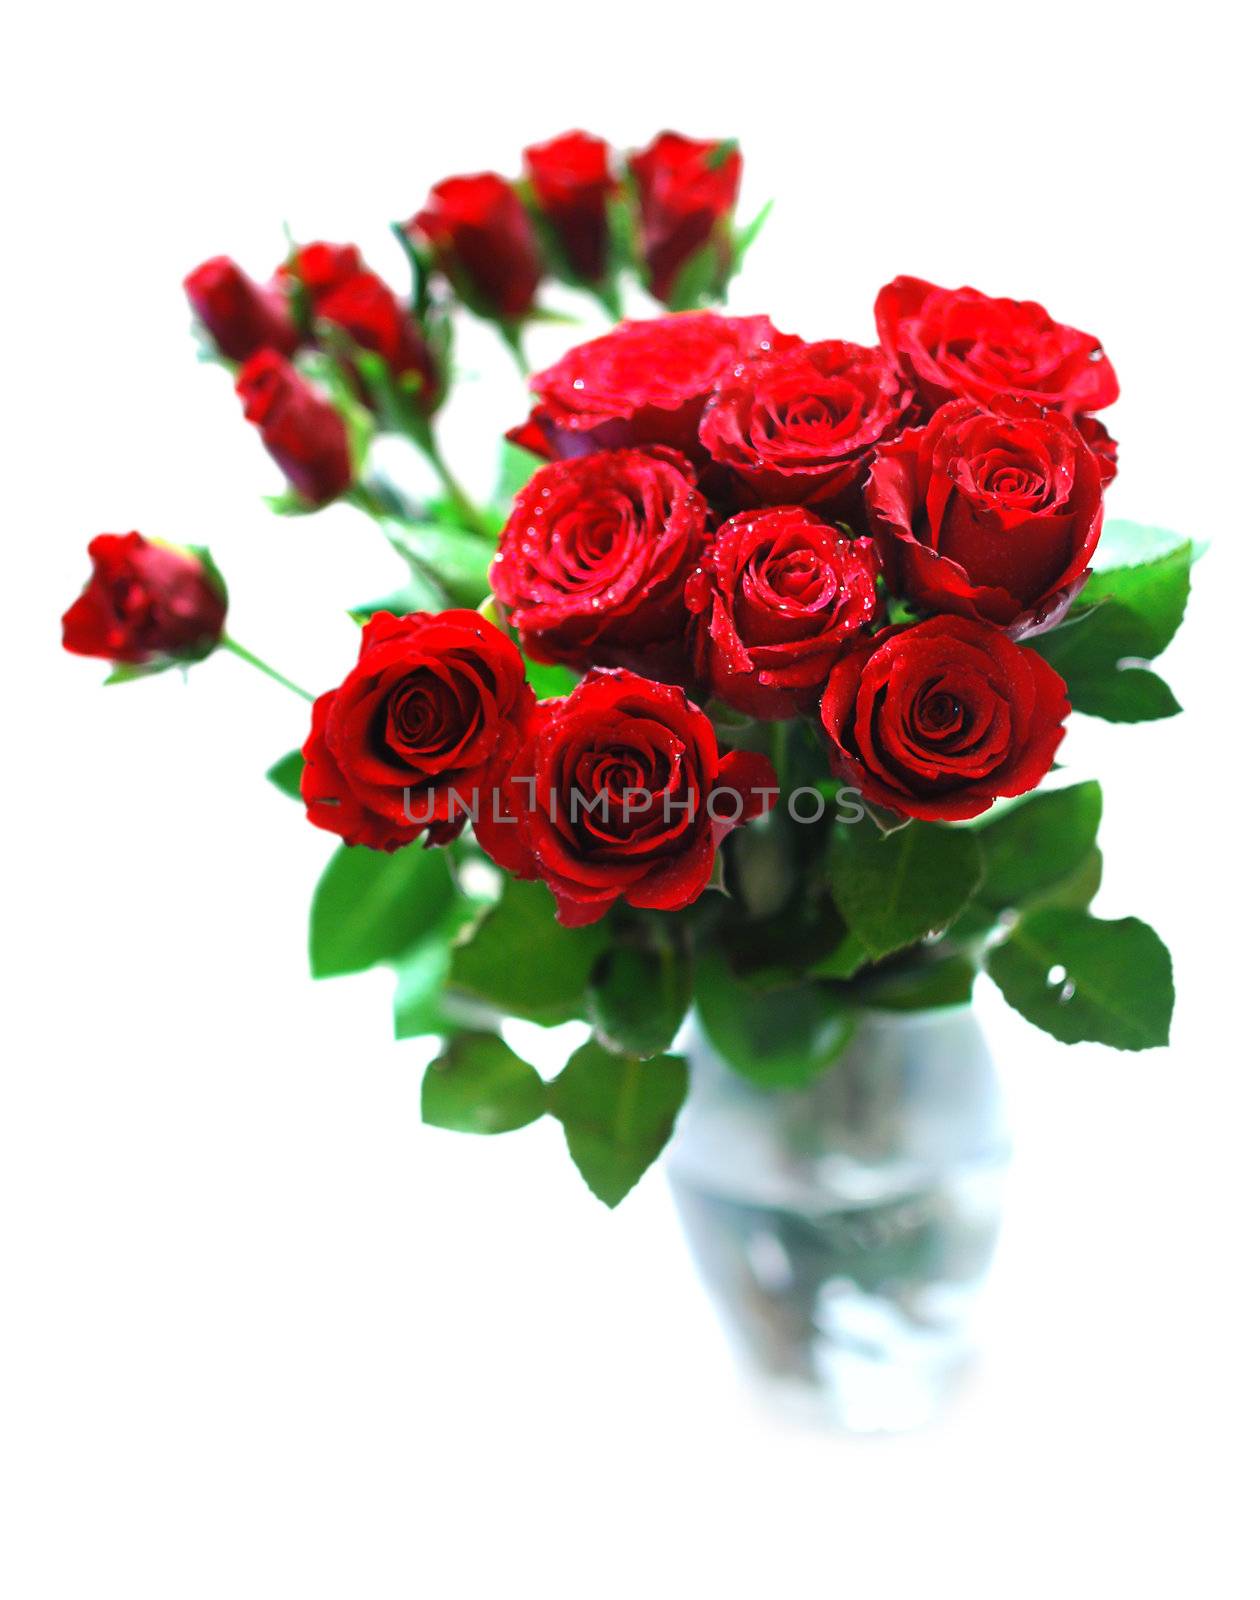 Bouquet of Red Roses in Glass Vase on White Background - Shallow Depth of Field